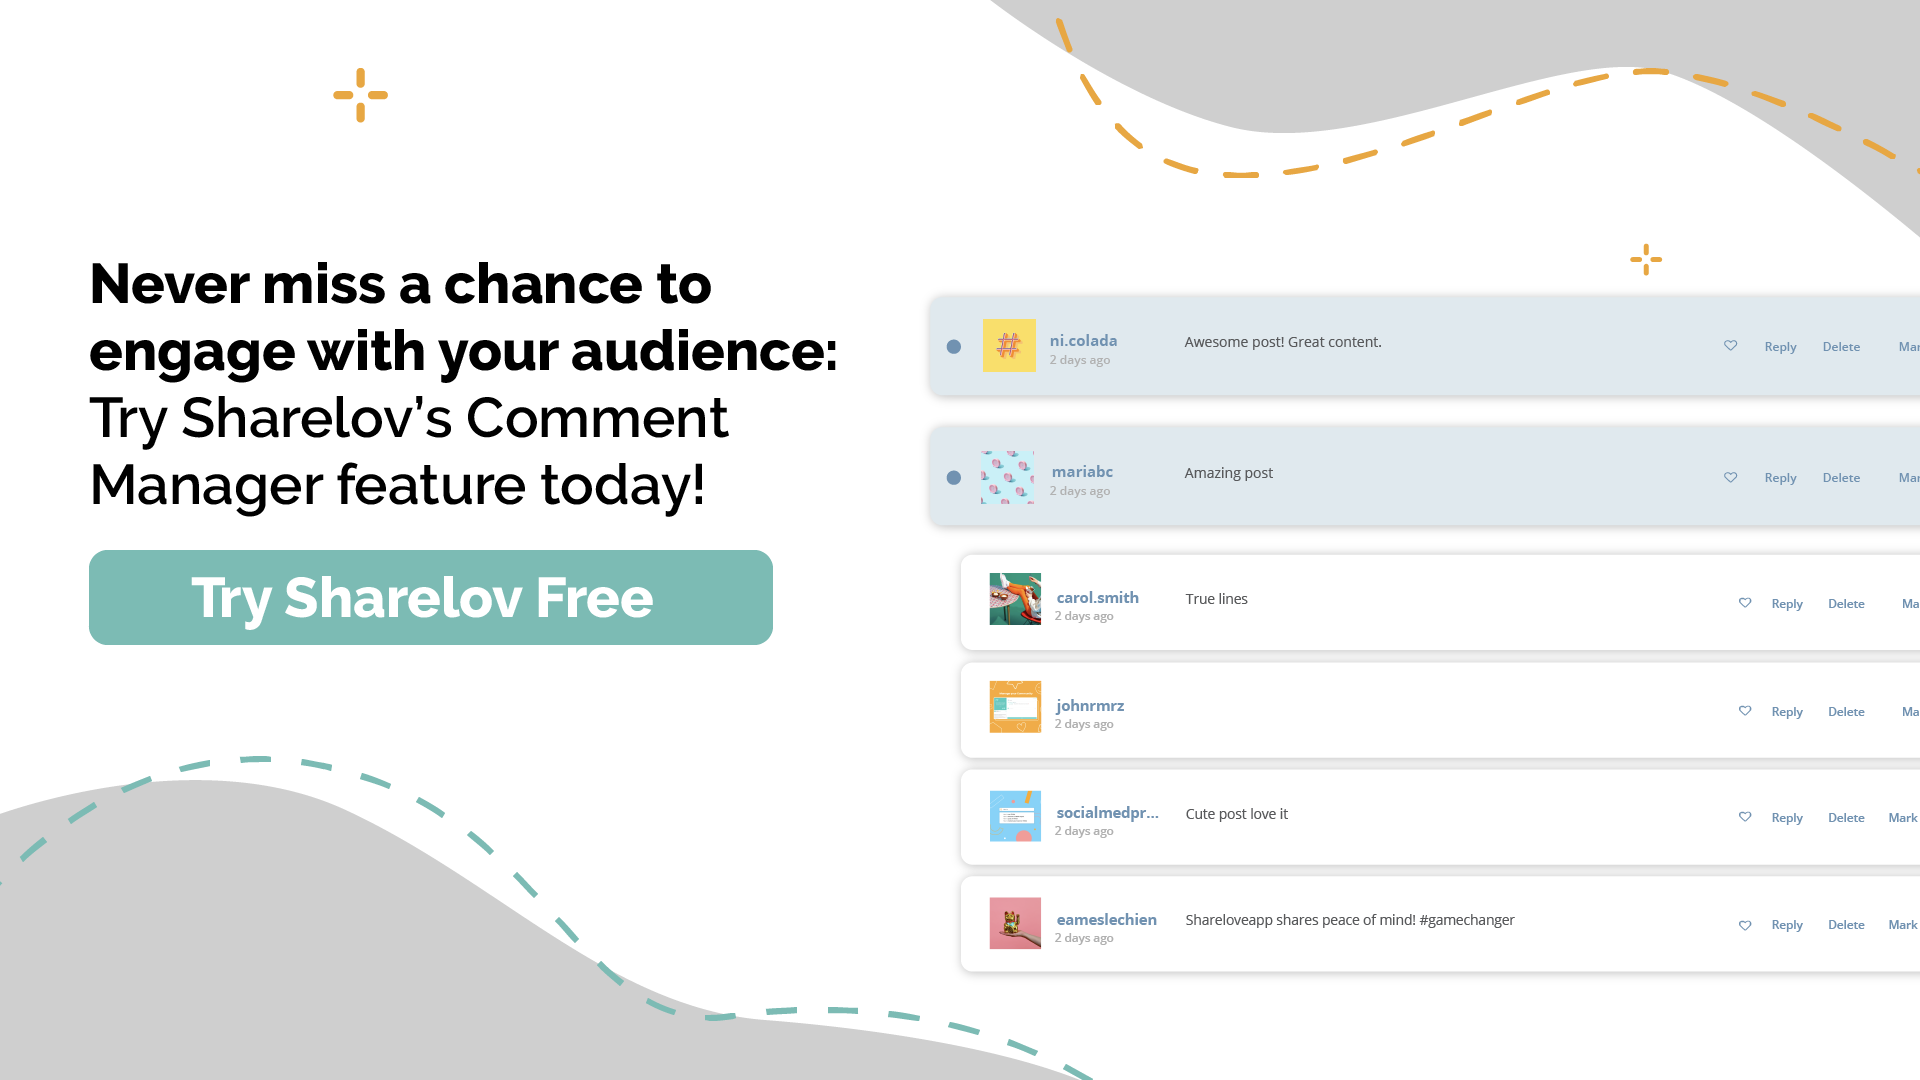 Never miss a chance to engage with your audience: Try Sharelov’s Comment Manager feature today